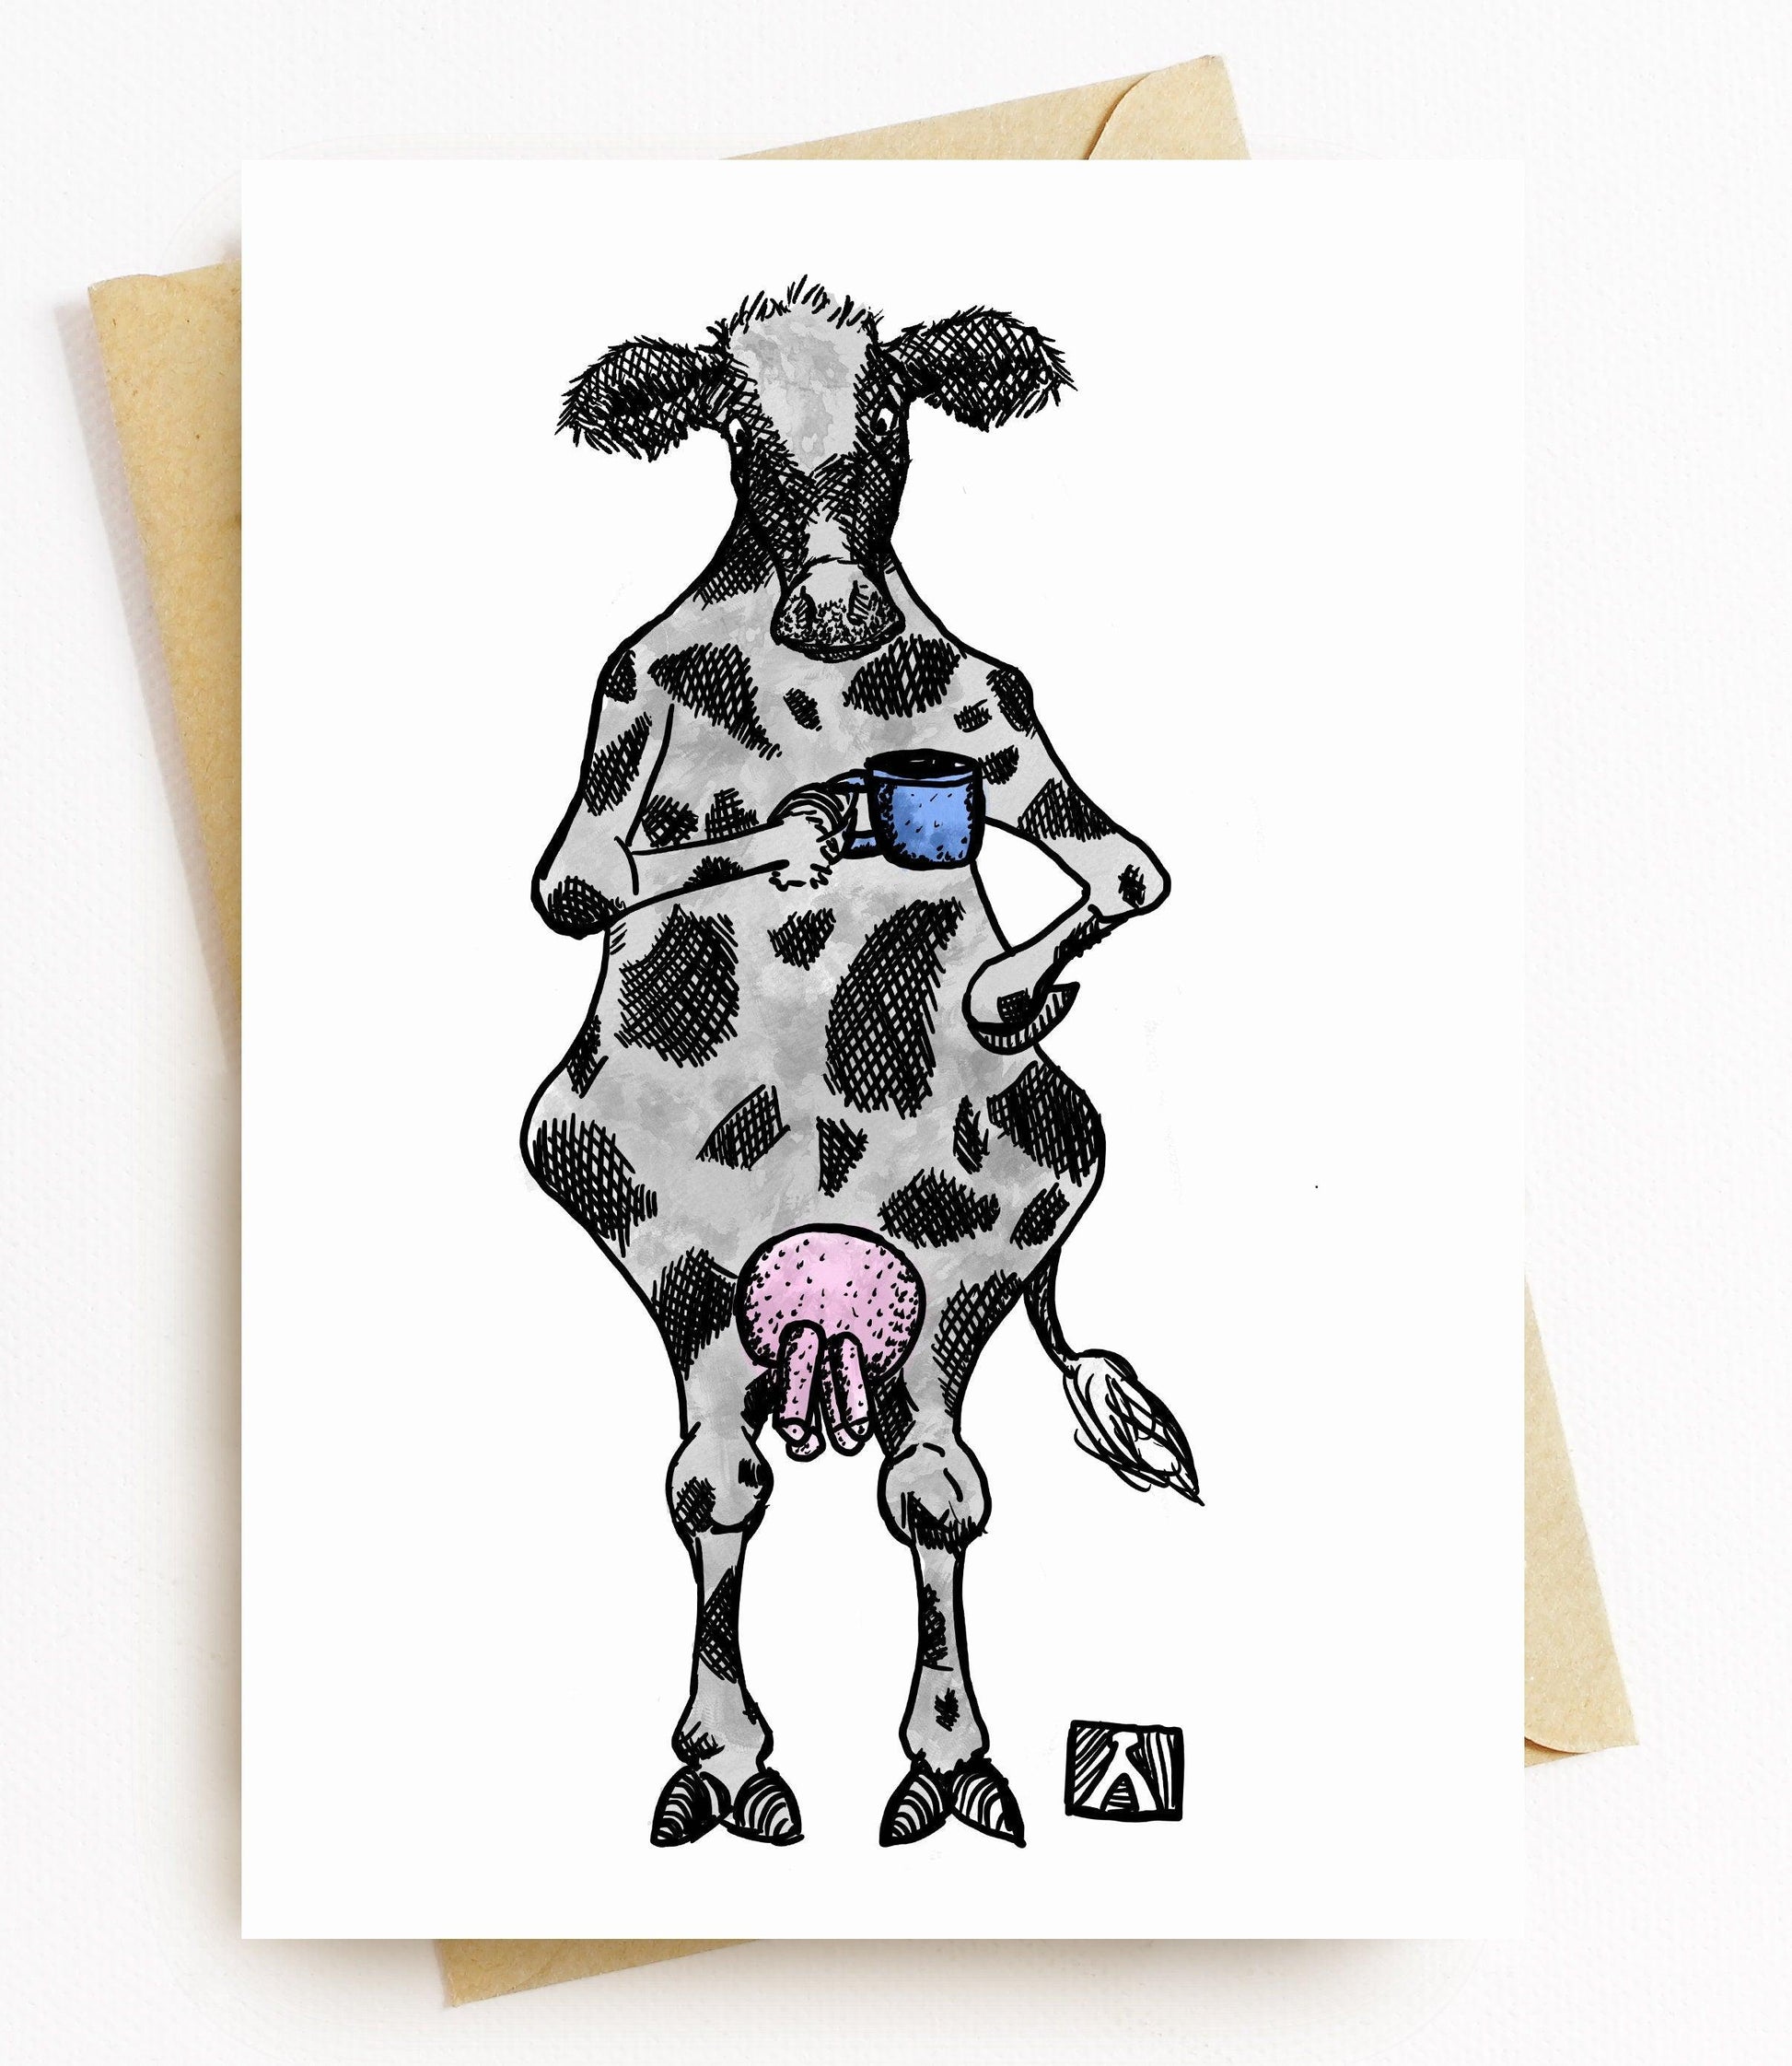 BellavanceInk: Cow Standing With Cup Of Coffee Pen And Ink Illustration 5 x 7 Inches - BellavanceInk